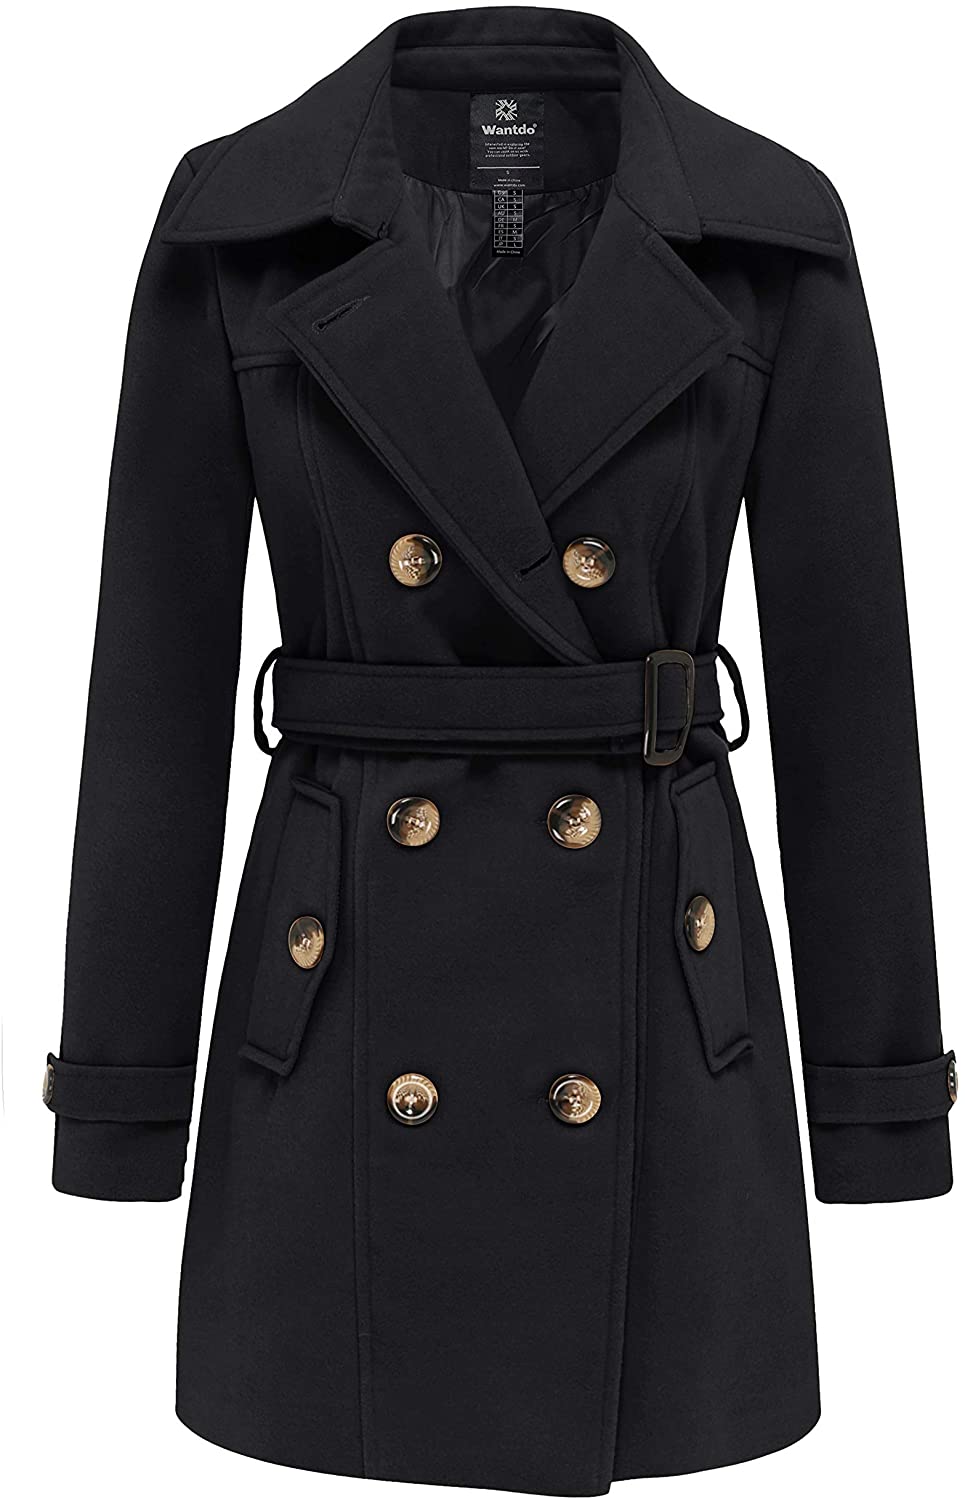 Rambling Womens Winter Lapel Wool Coat Double-Breasted Outerwear Winter Warm Trench Jacket with Belt